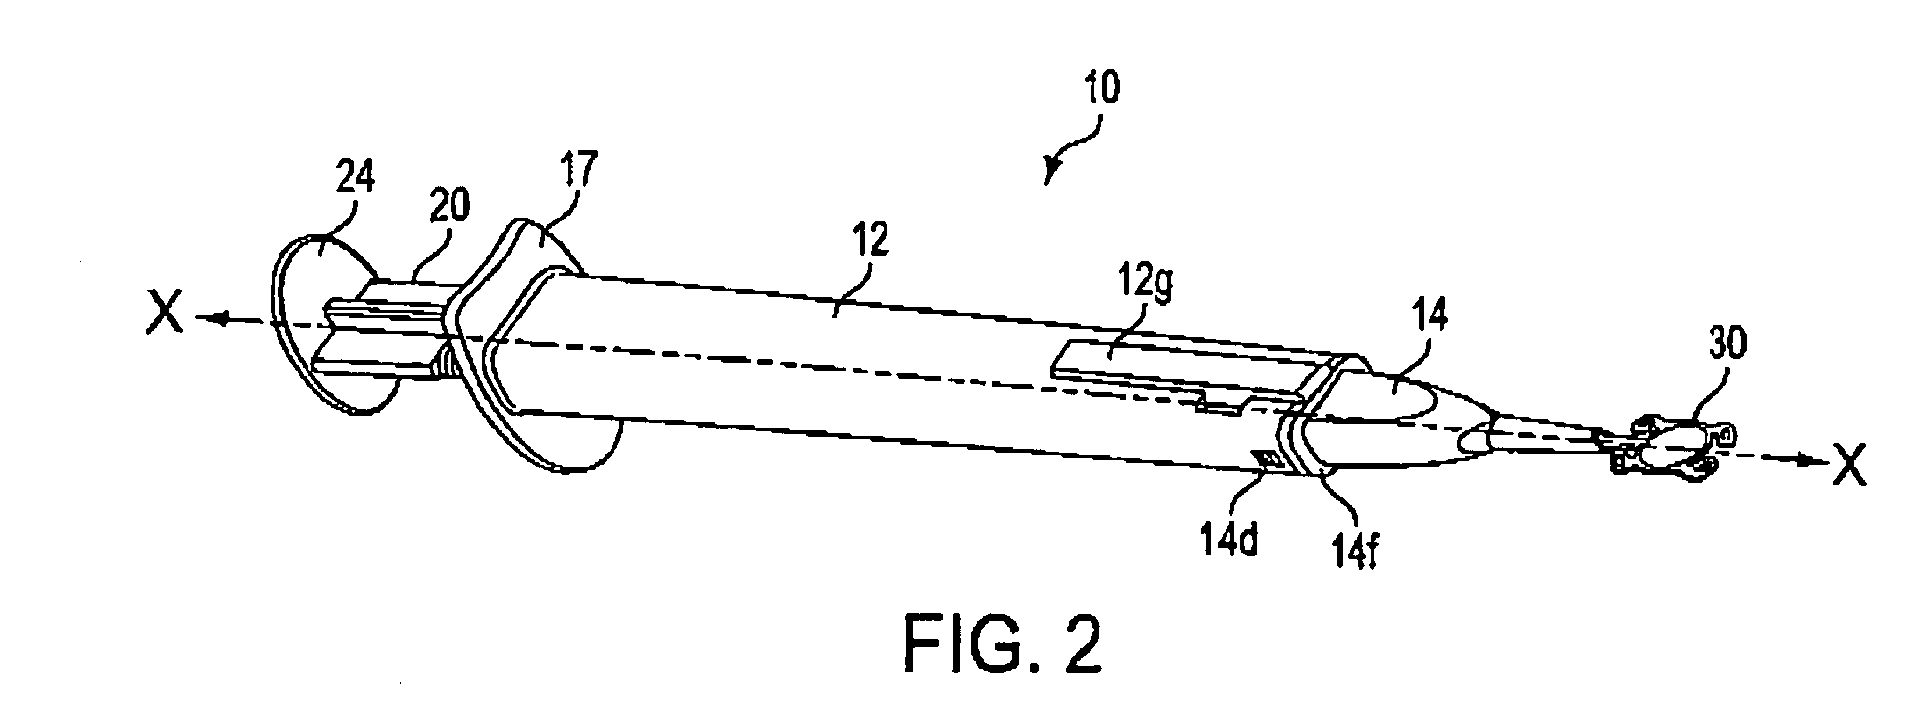 Preloaded IOL injector and method